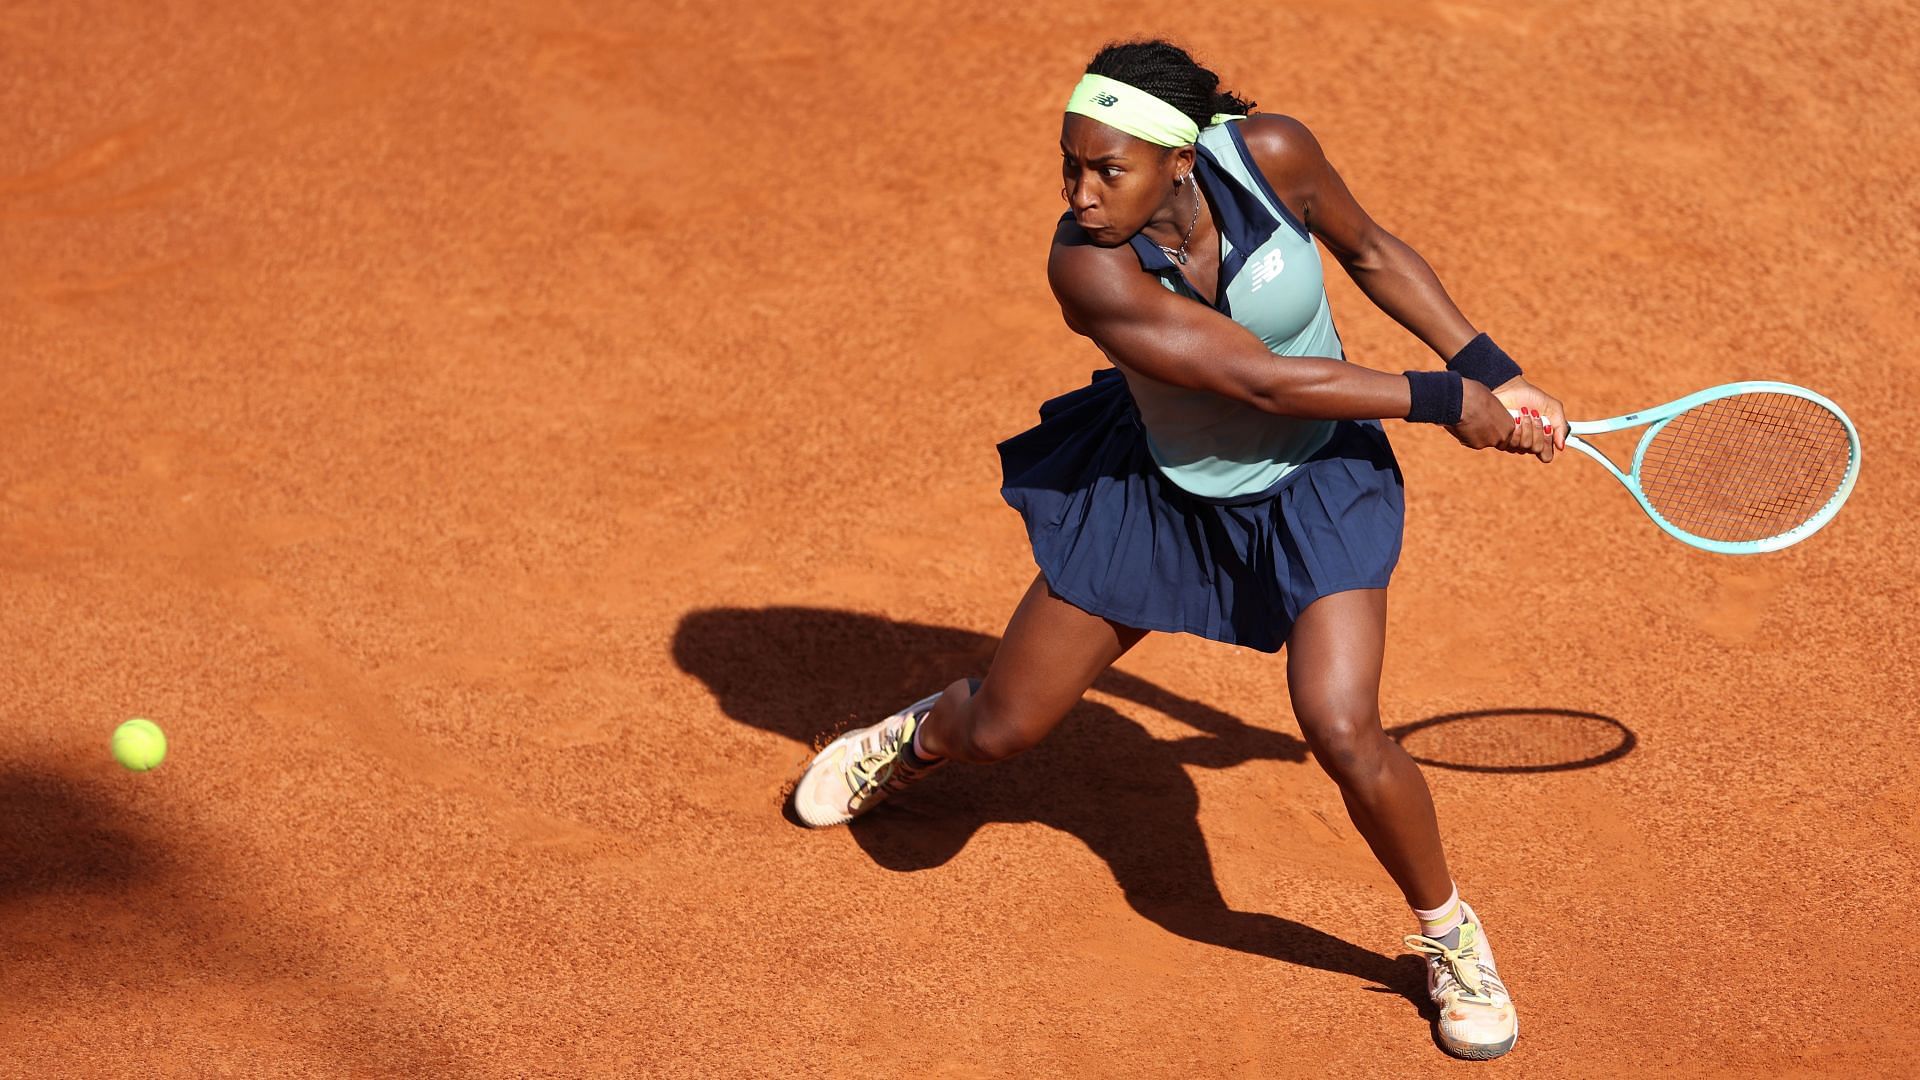 Coco Gauff hits a backhand during her Italian Open 4R match